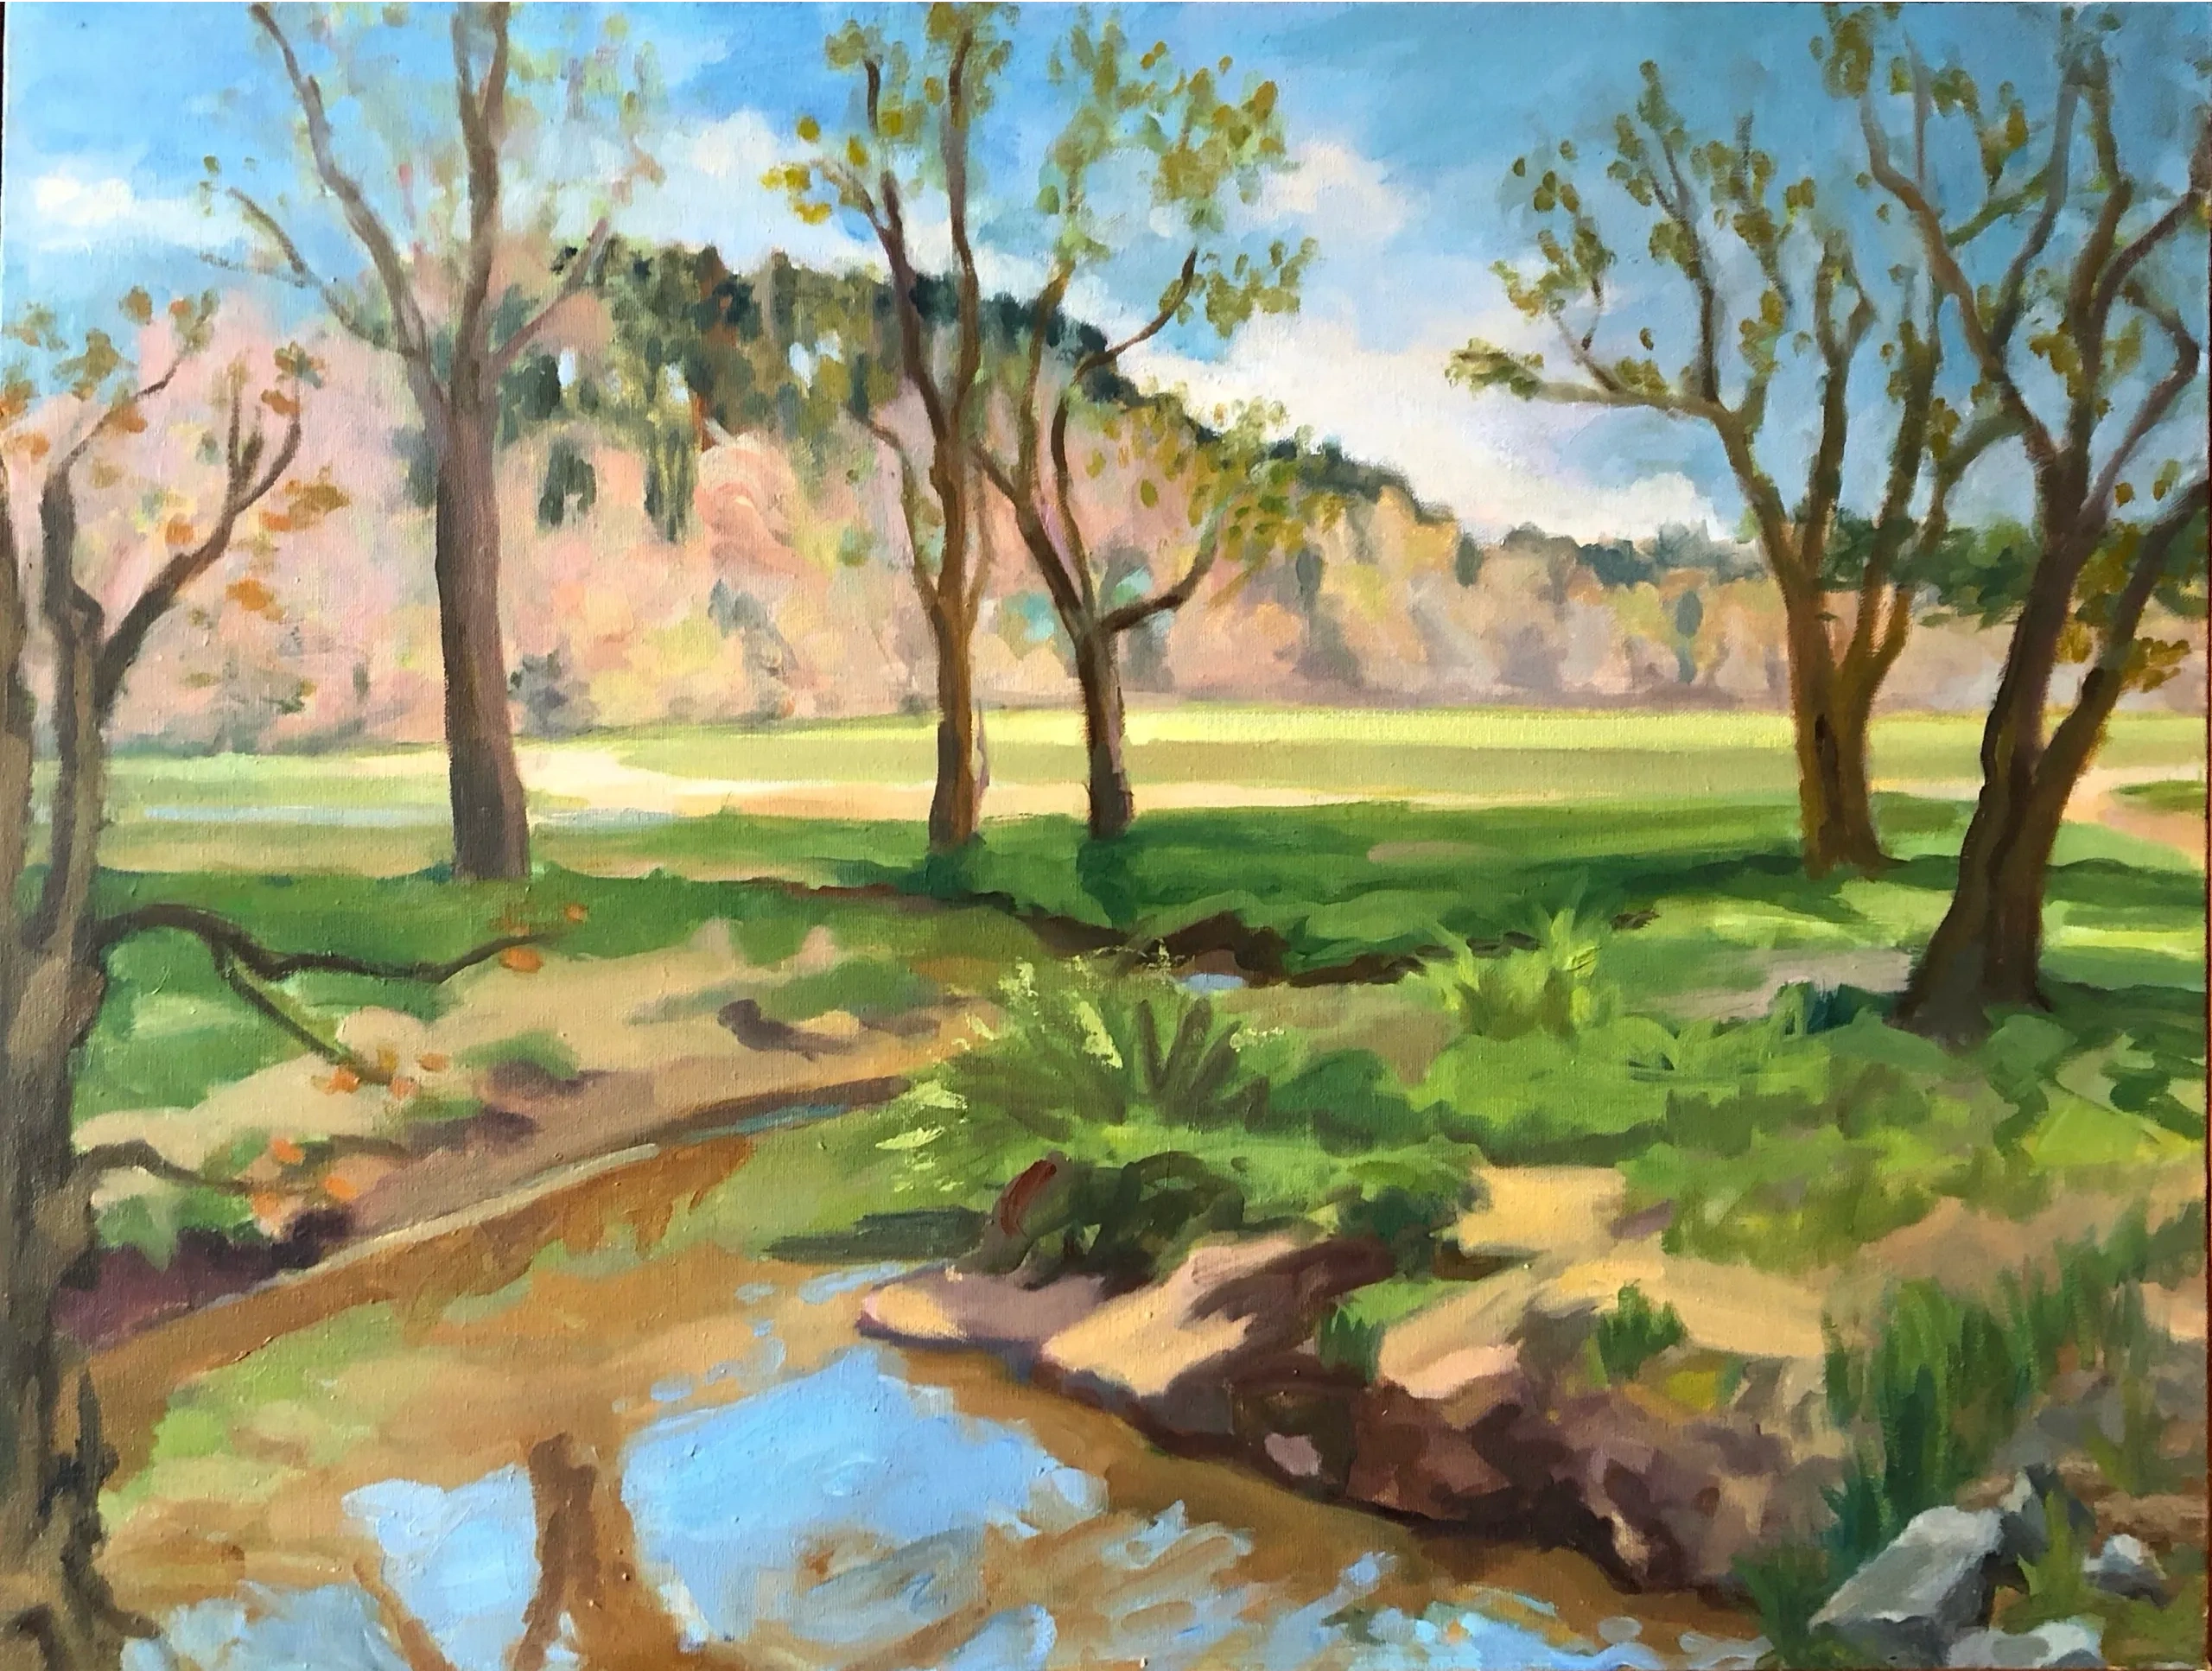 Biltmore stream,Spring - oil on canvas 20"x 26"$300 SOLD